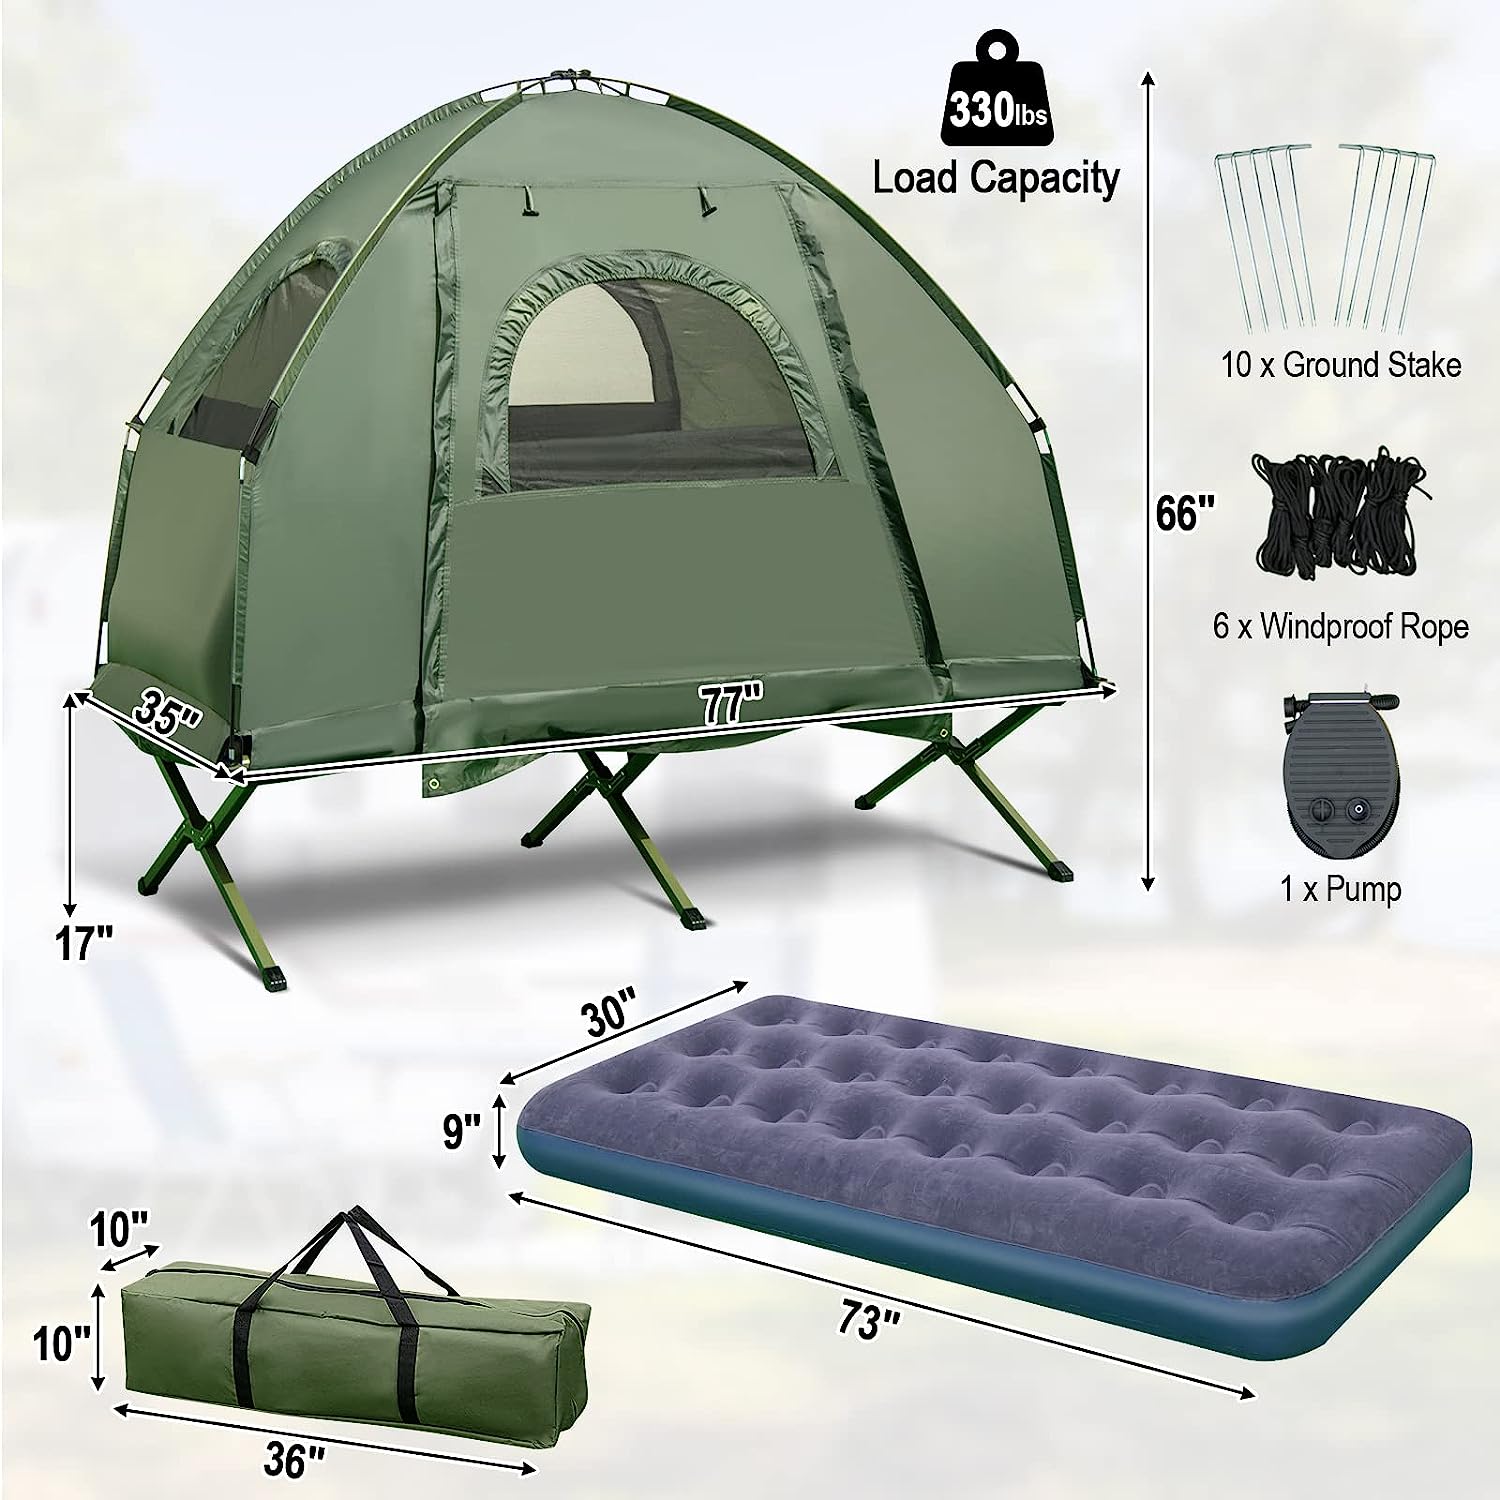 Goplus Camping Cot Size